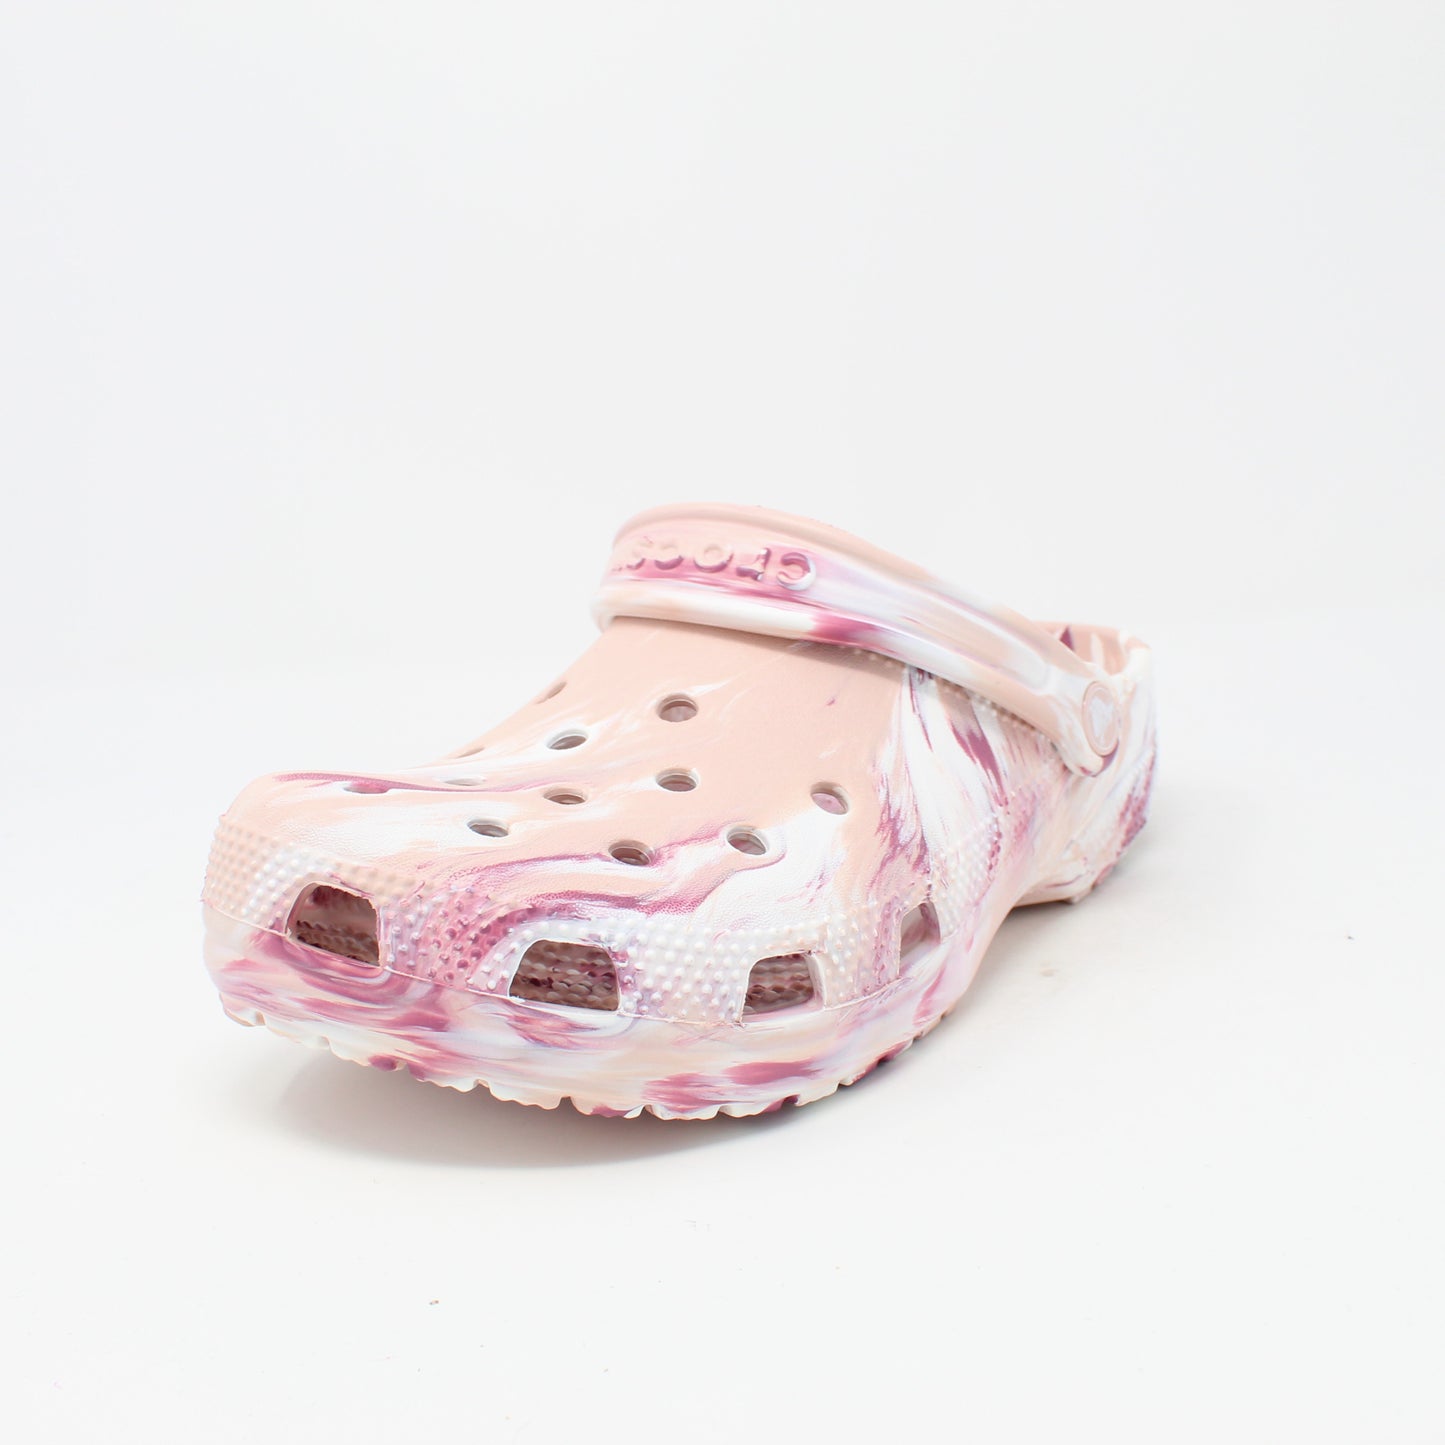 classic-marbled-clogPink